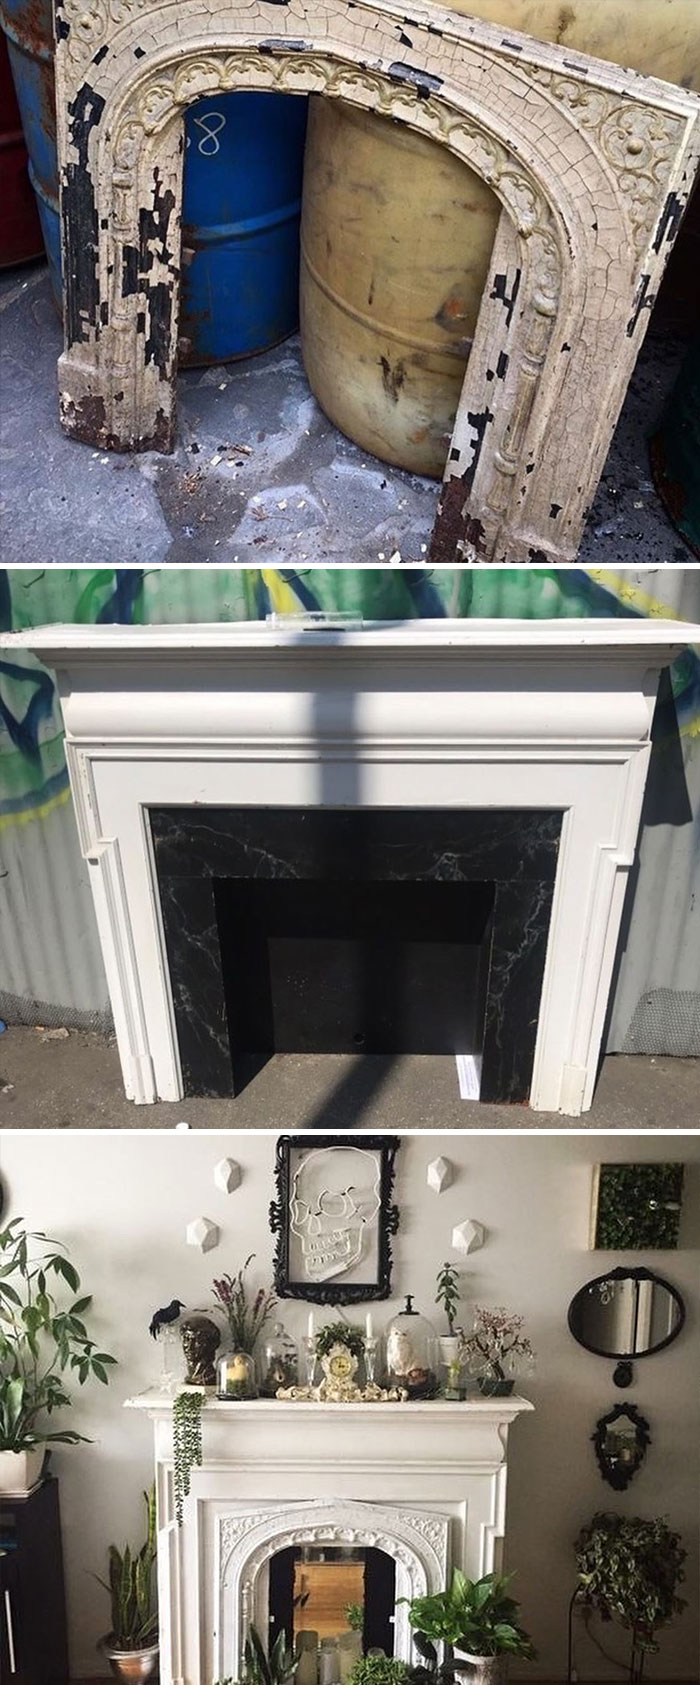 I Had To Share My Street Find Fireplace Journey With You